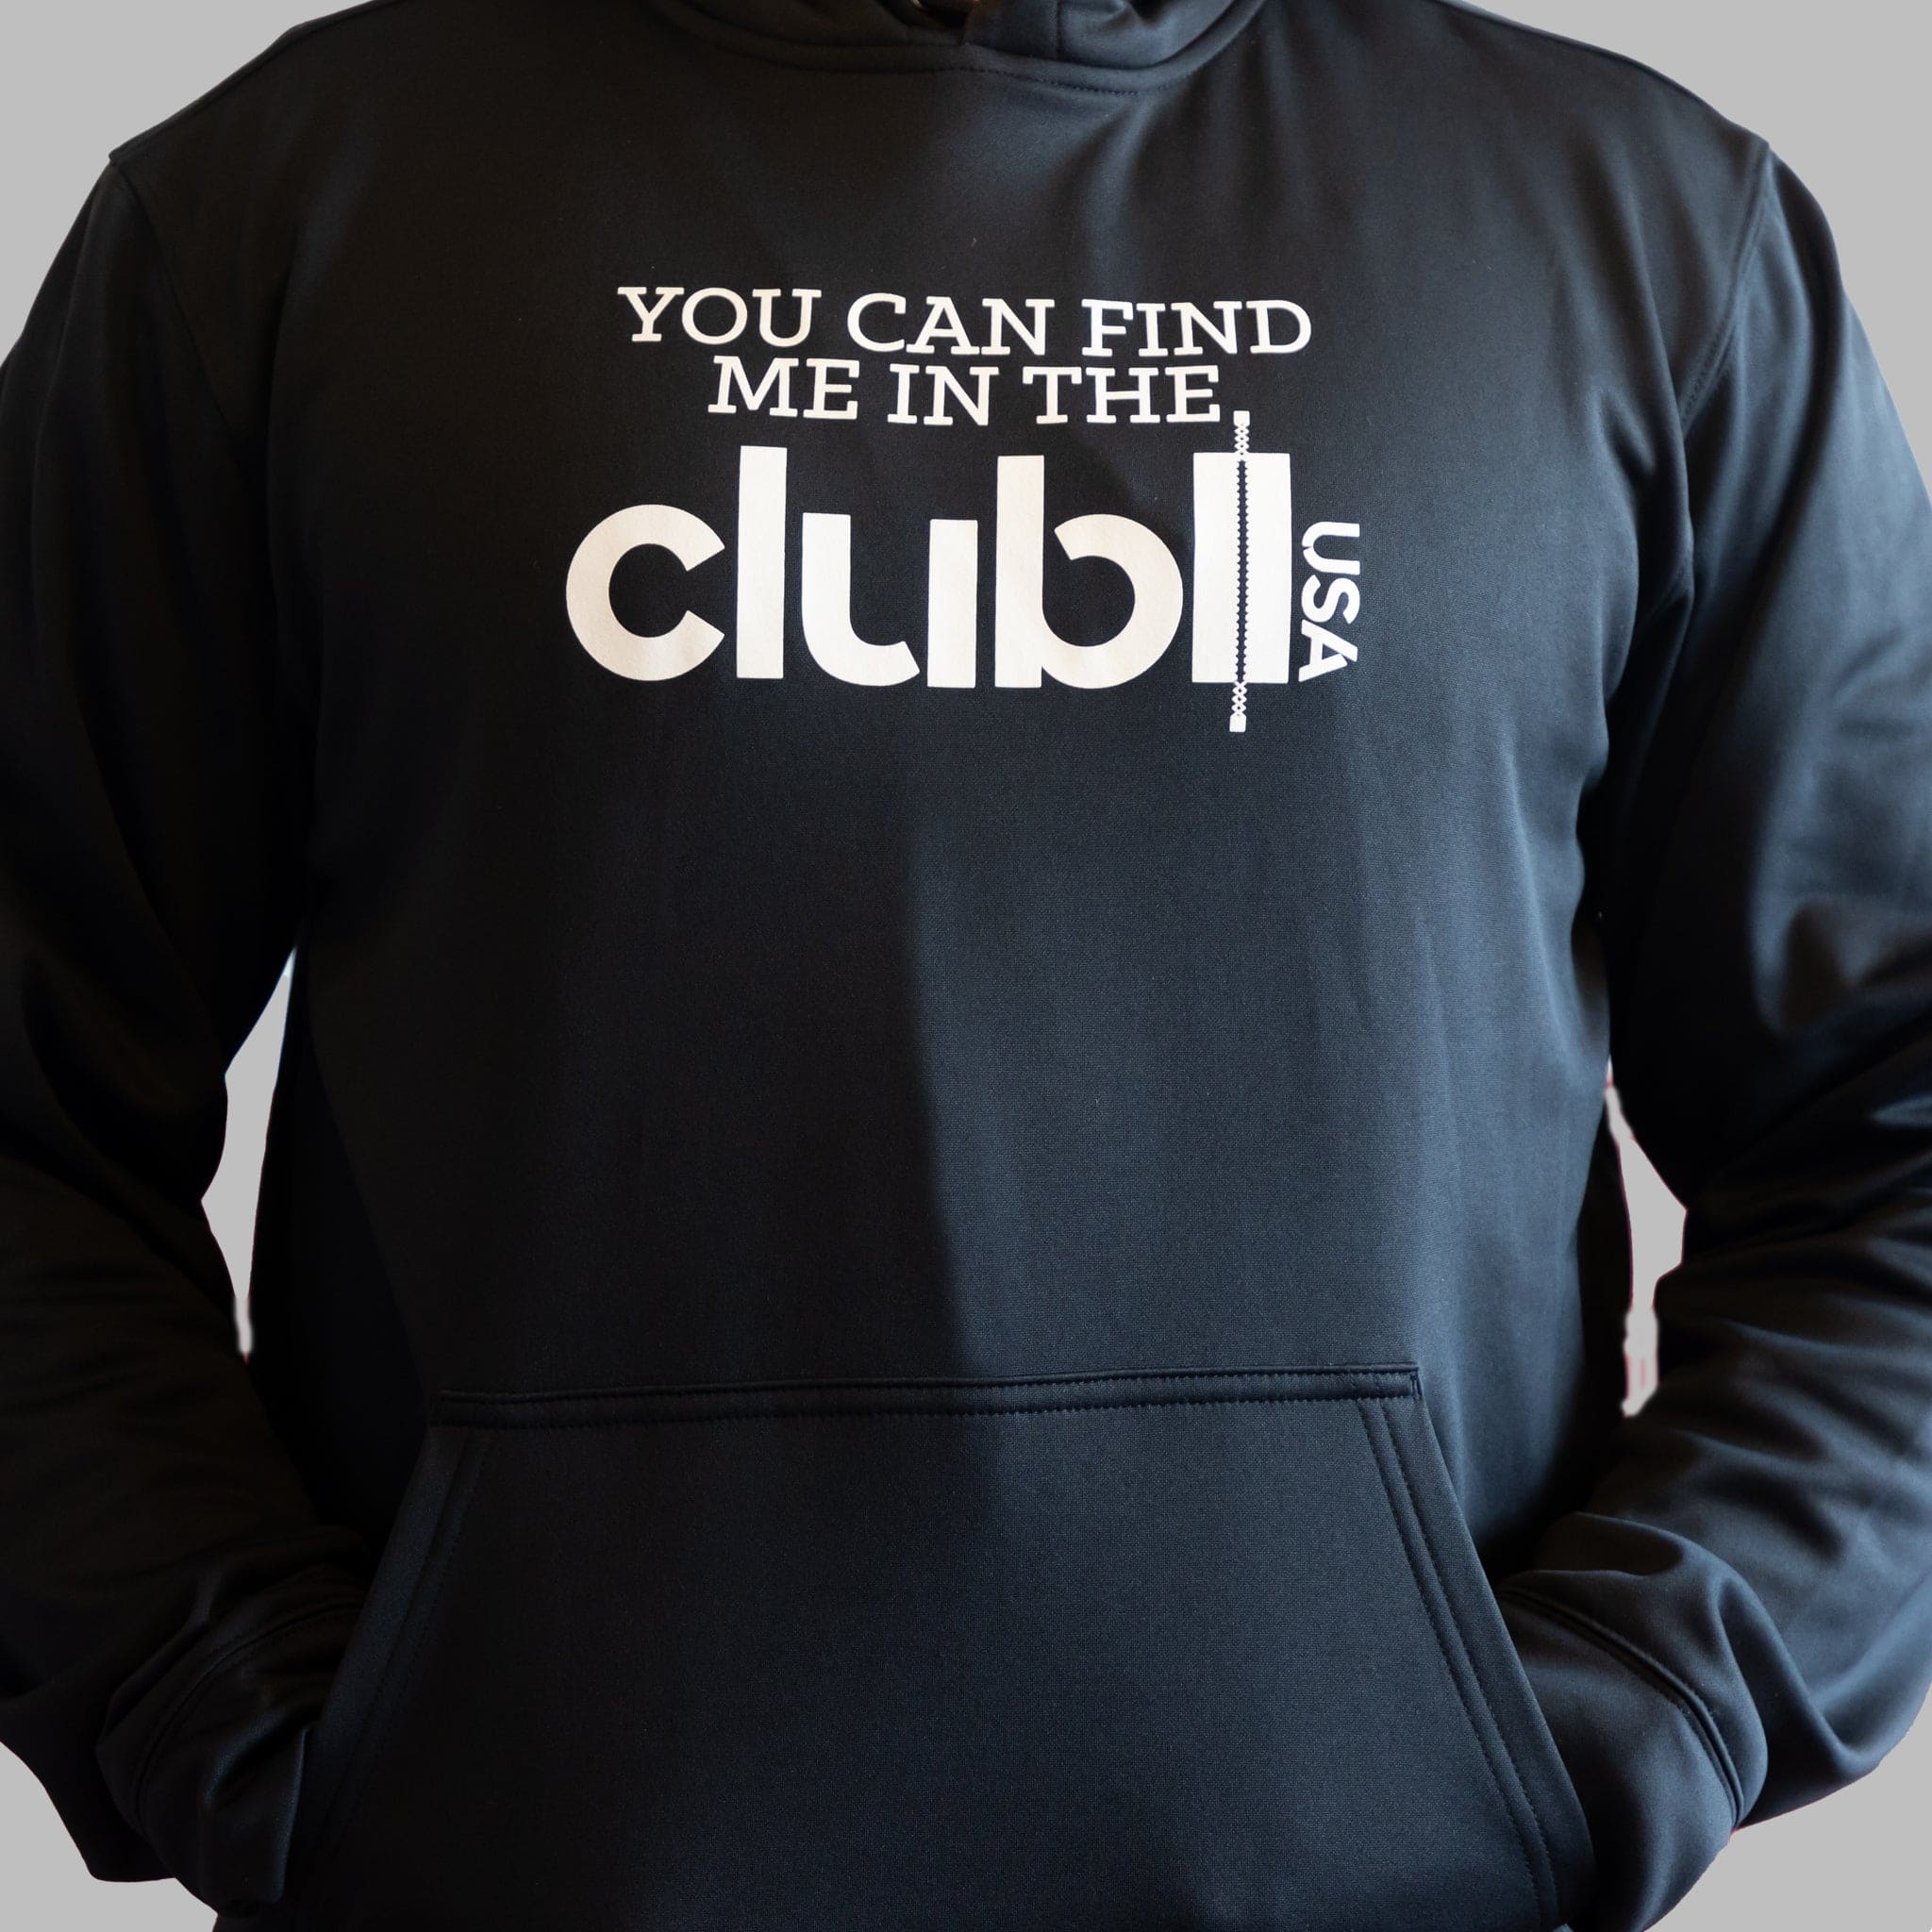 Club Hoodie - You can find me in the club